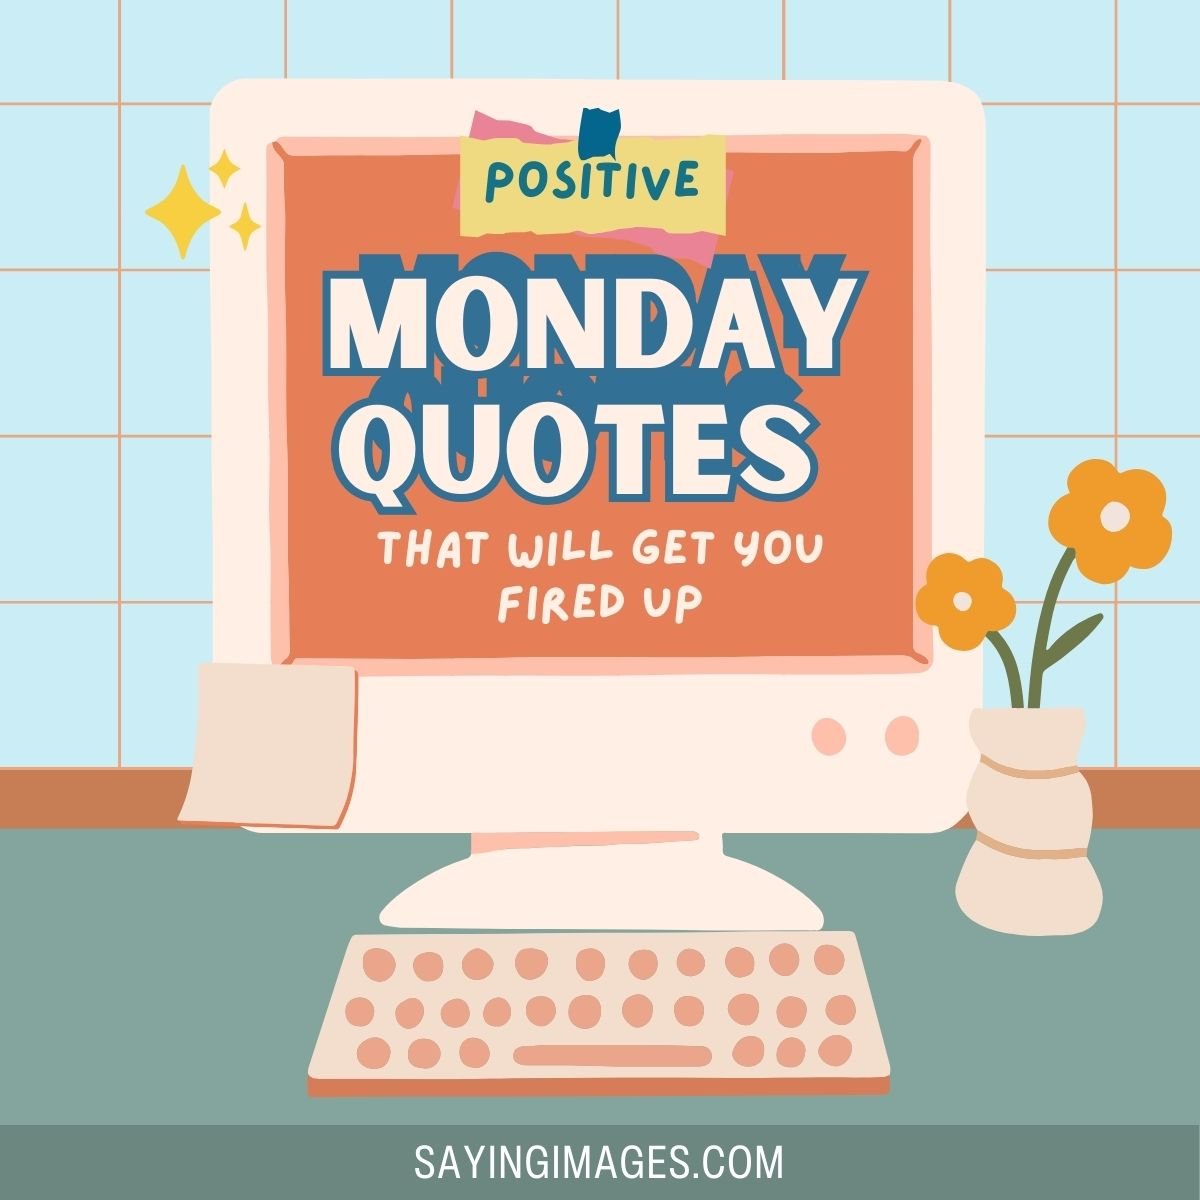 35 Positive Monday Quotes